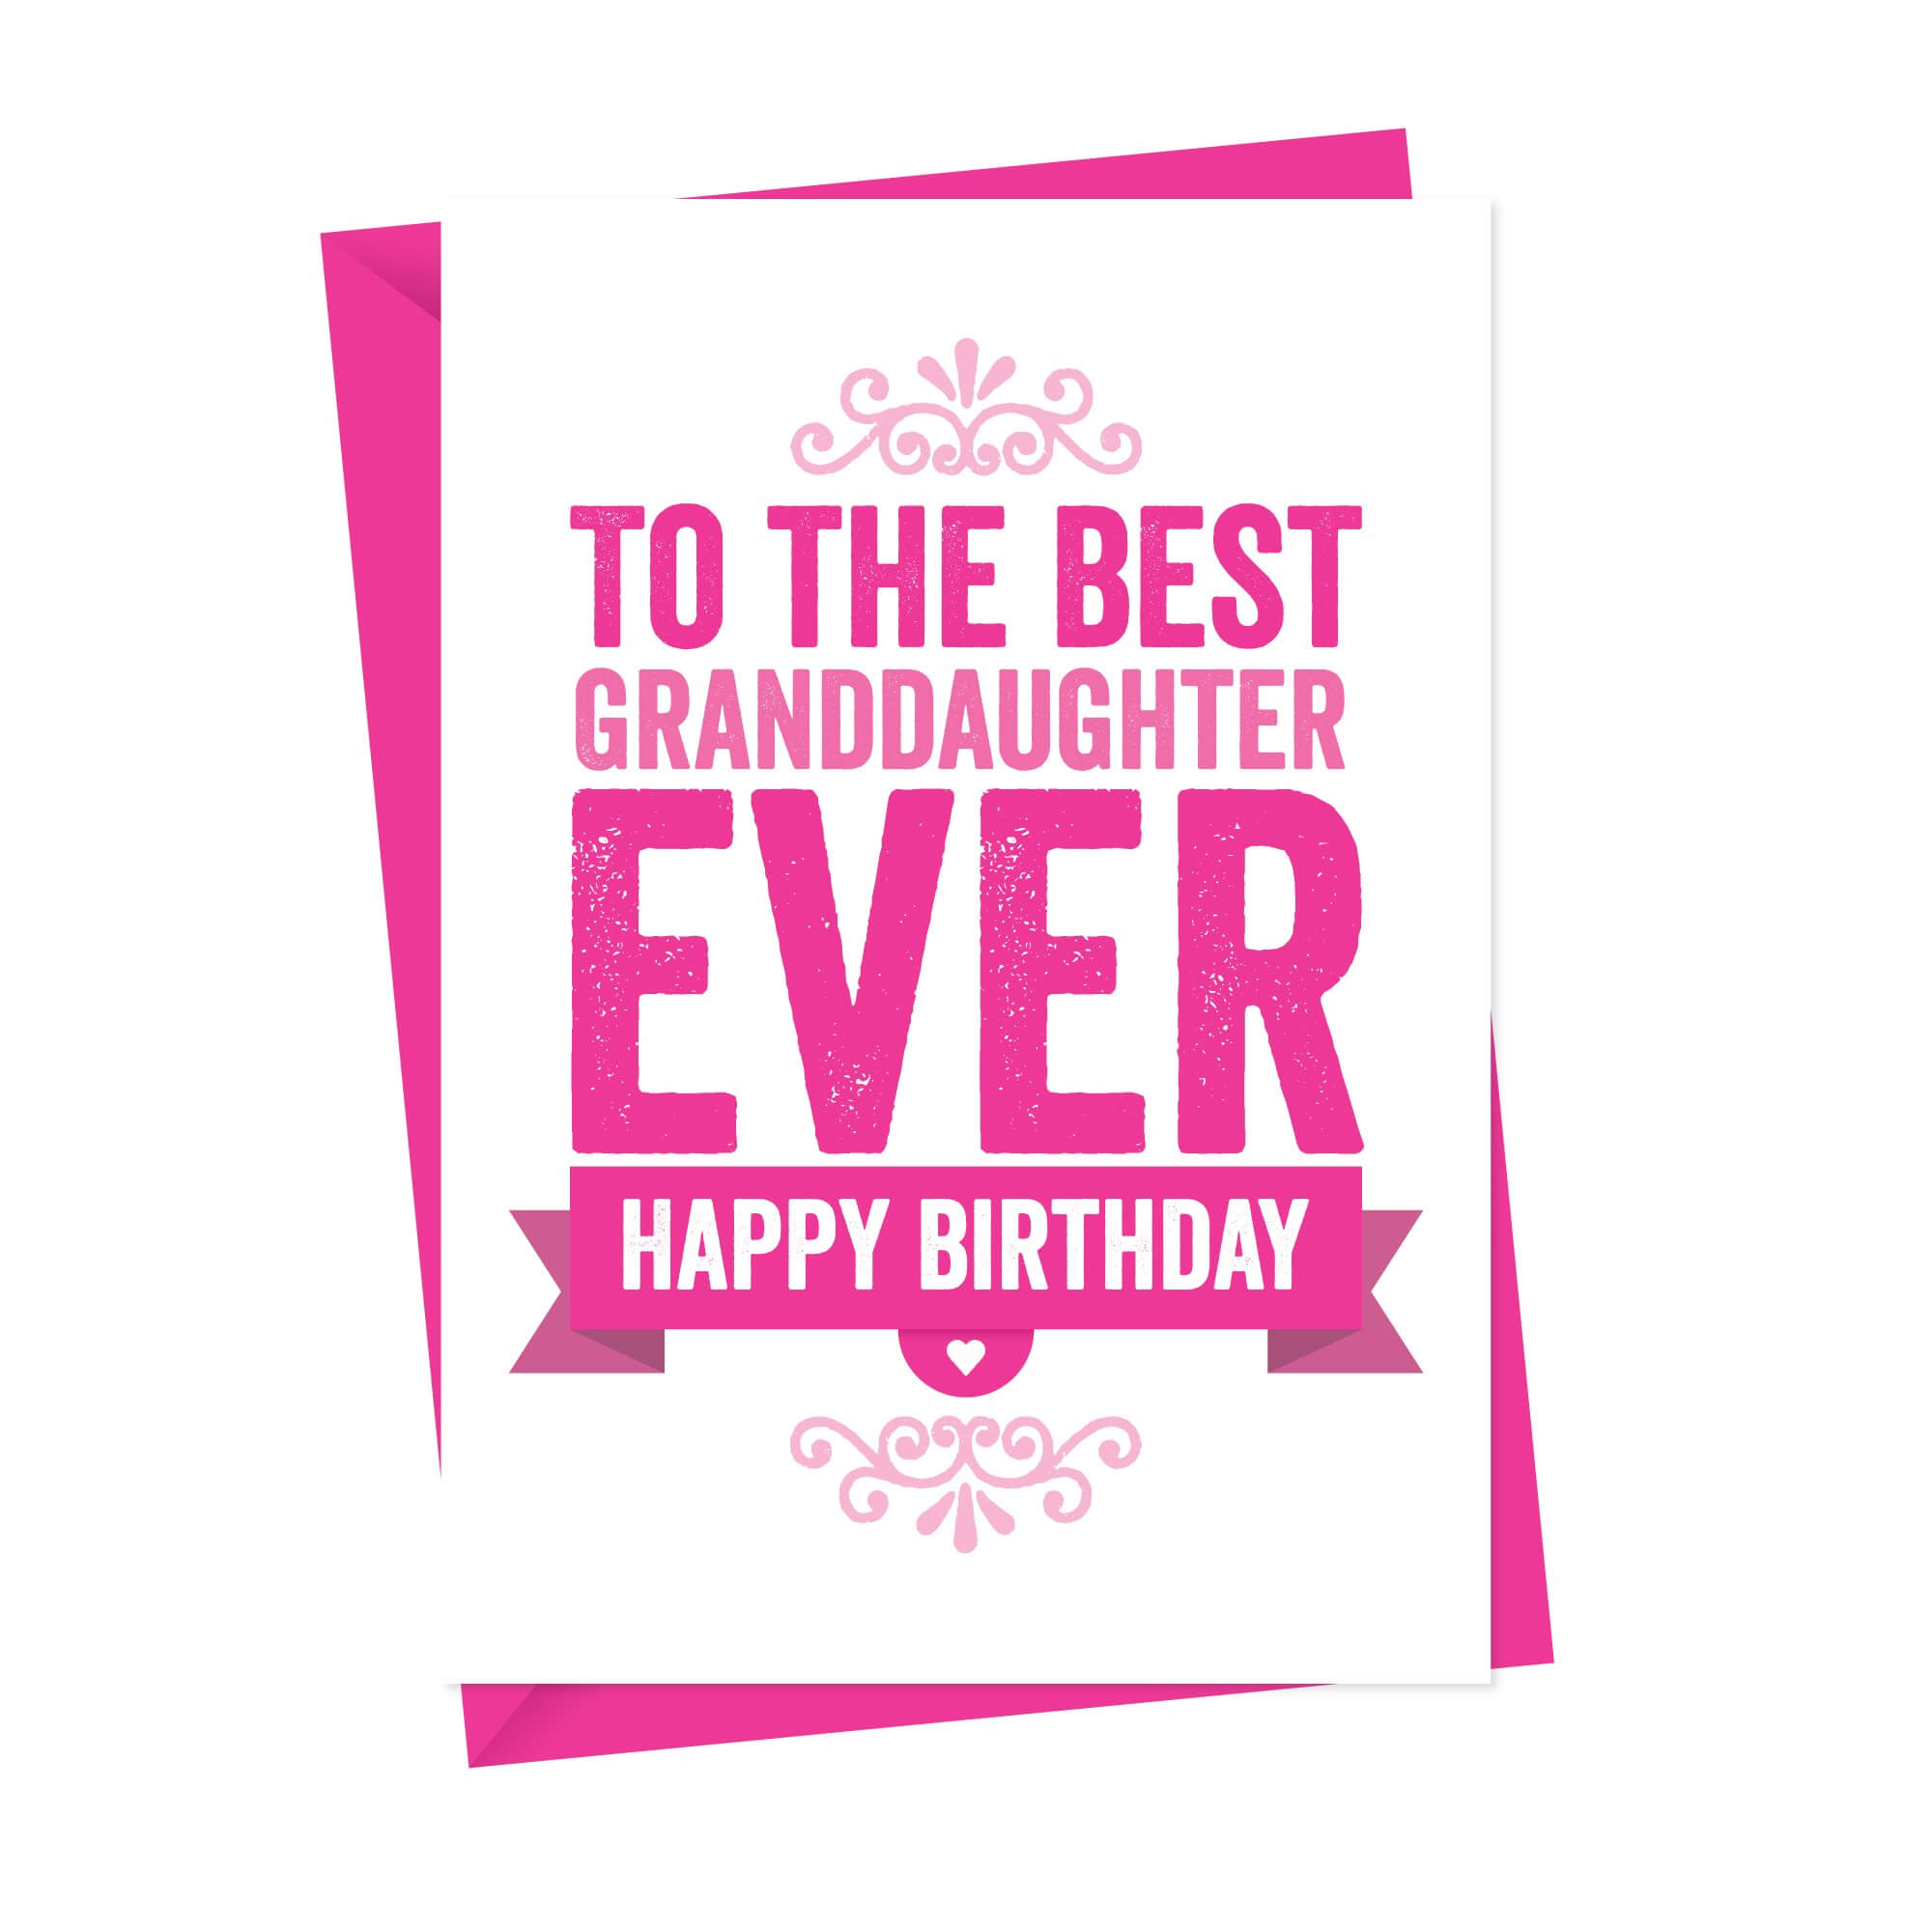 Happy Birthday Wishes to Best Granddaughter